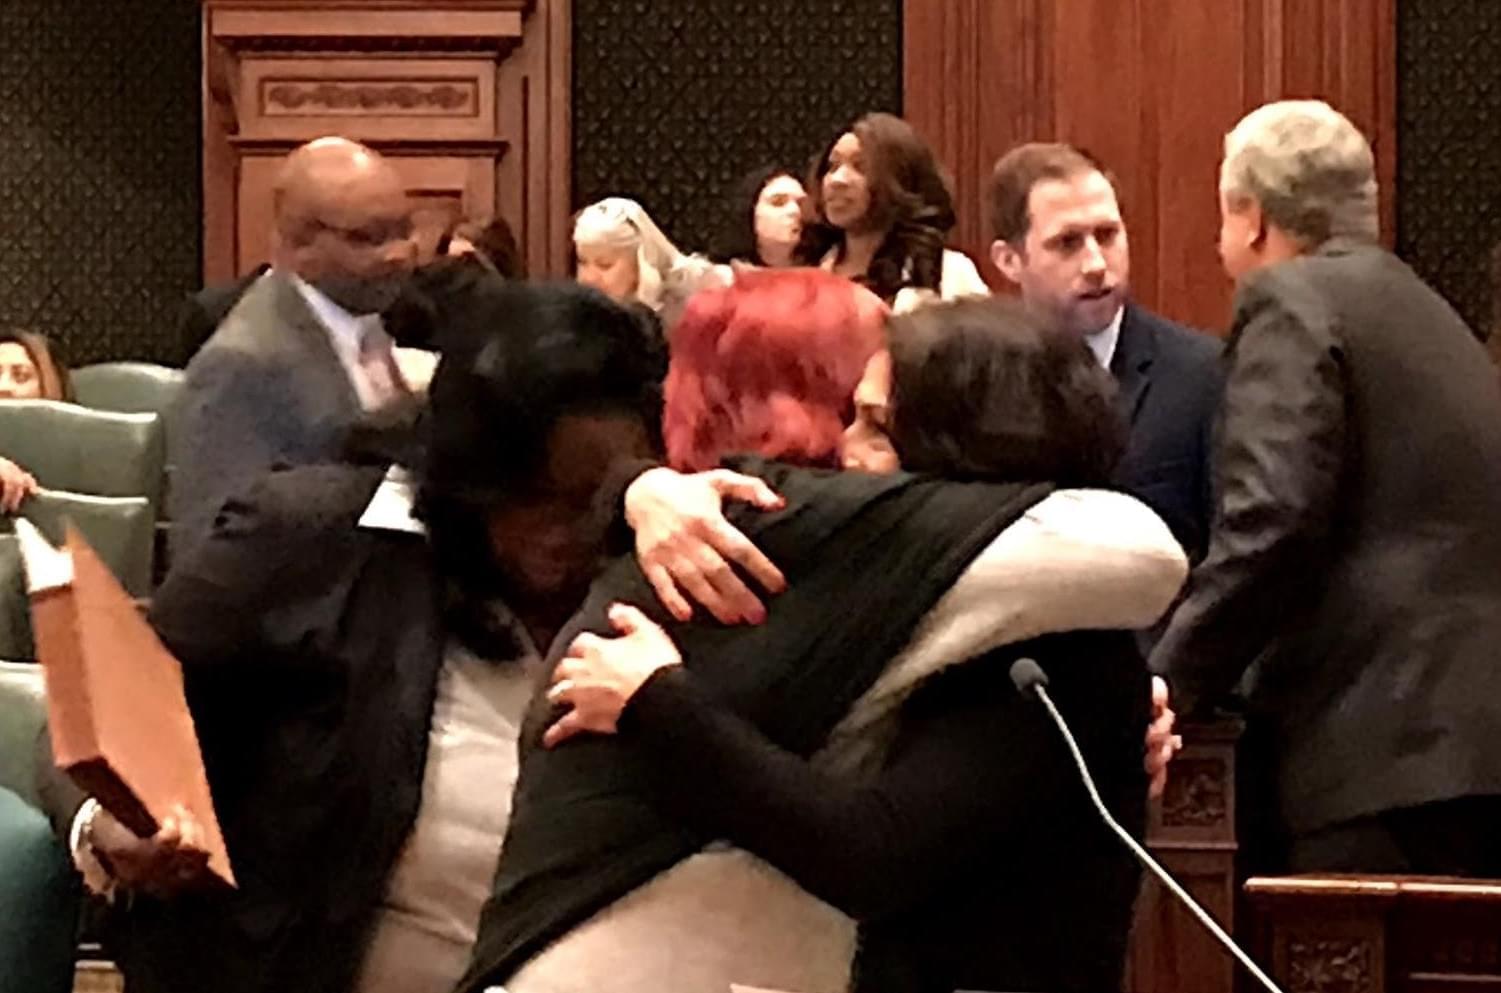 State Rep. Lisa Hernandez (D, left) receives a hug from Republican State Rep. Margo McDermed after the Illinois House votes to override Gov. Rauner's veto on the Voices Act on Nov. 28.